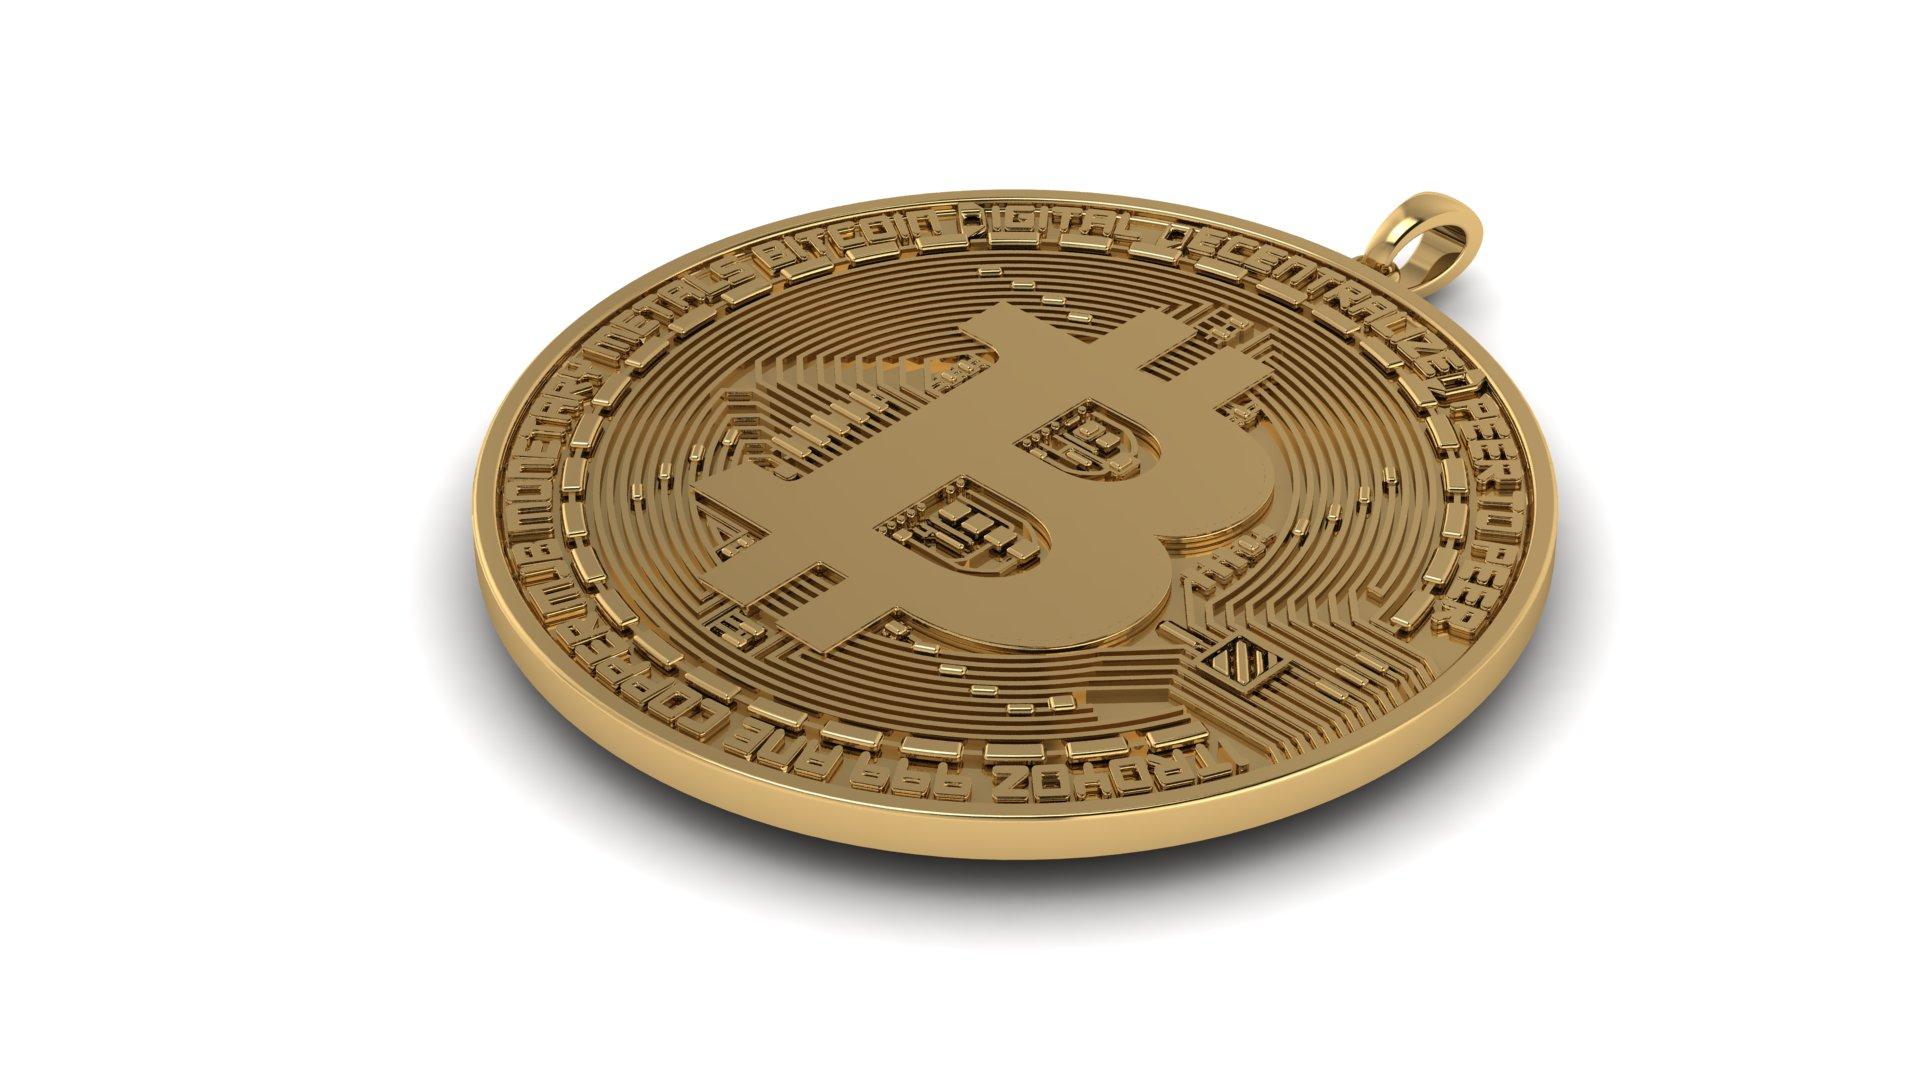 18k solid Yellow gold Bitcoint pendant necklace, with a chain lenght of 24 inches adjustable.

Introducing our exquisite 18k Yellow Gold Bitcoin Necklace Pendant: A fusion of elegance and innovation that transcends traditional jewelry. Crafted with